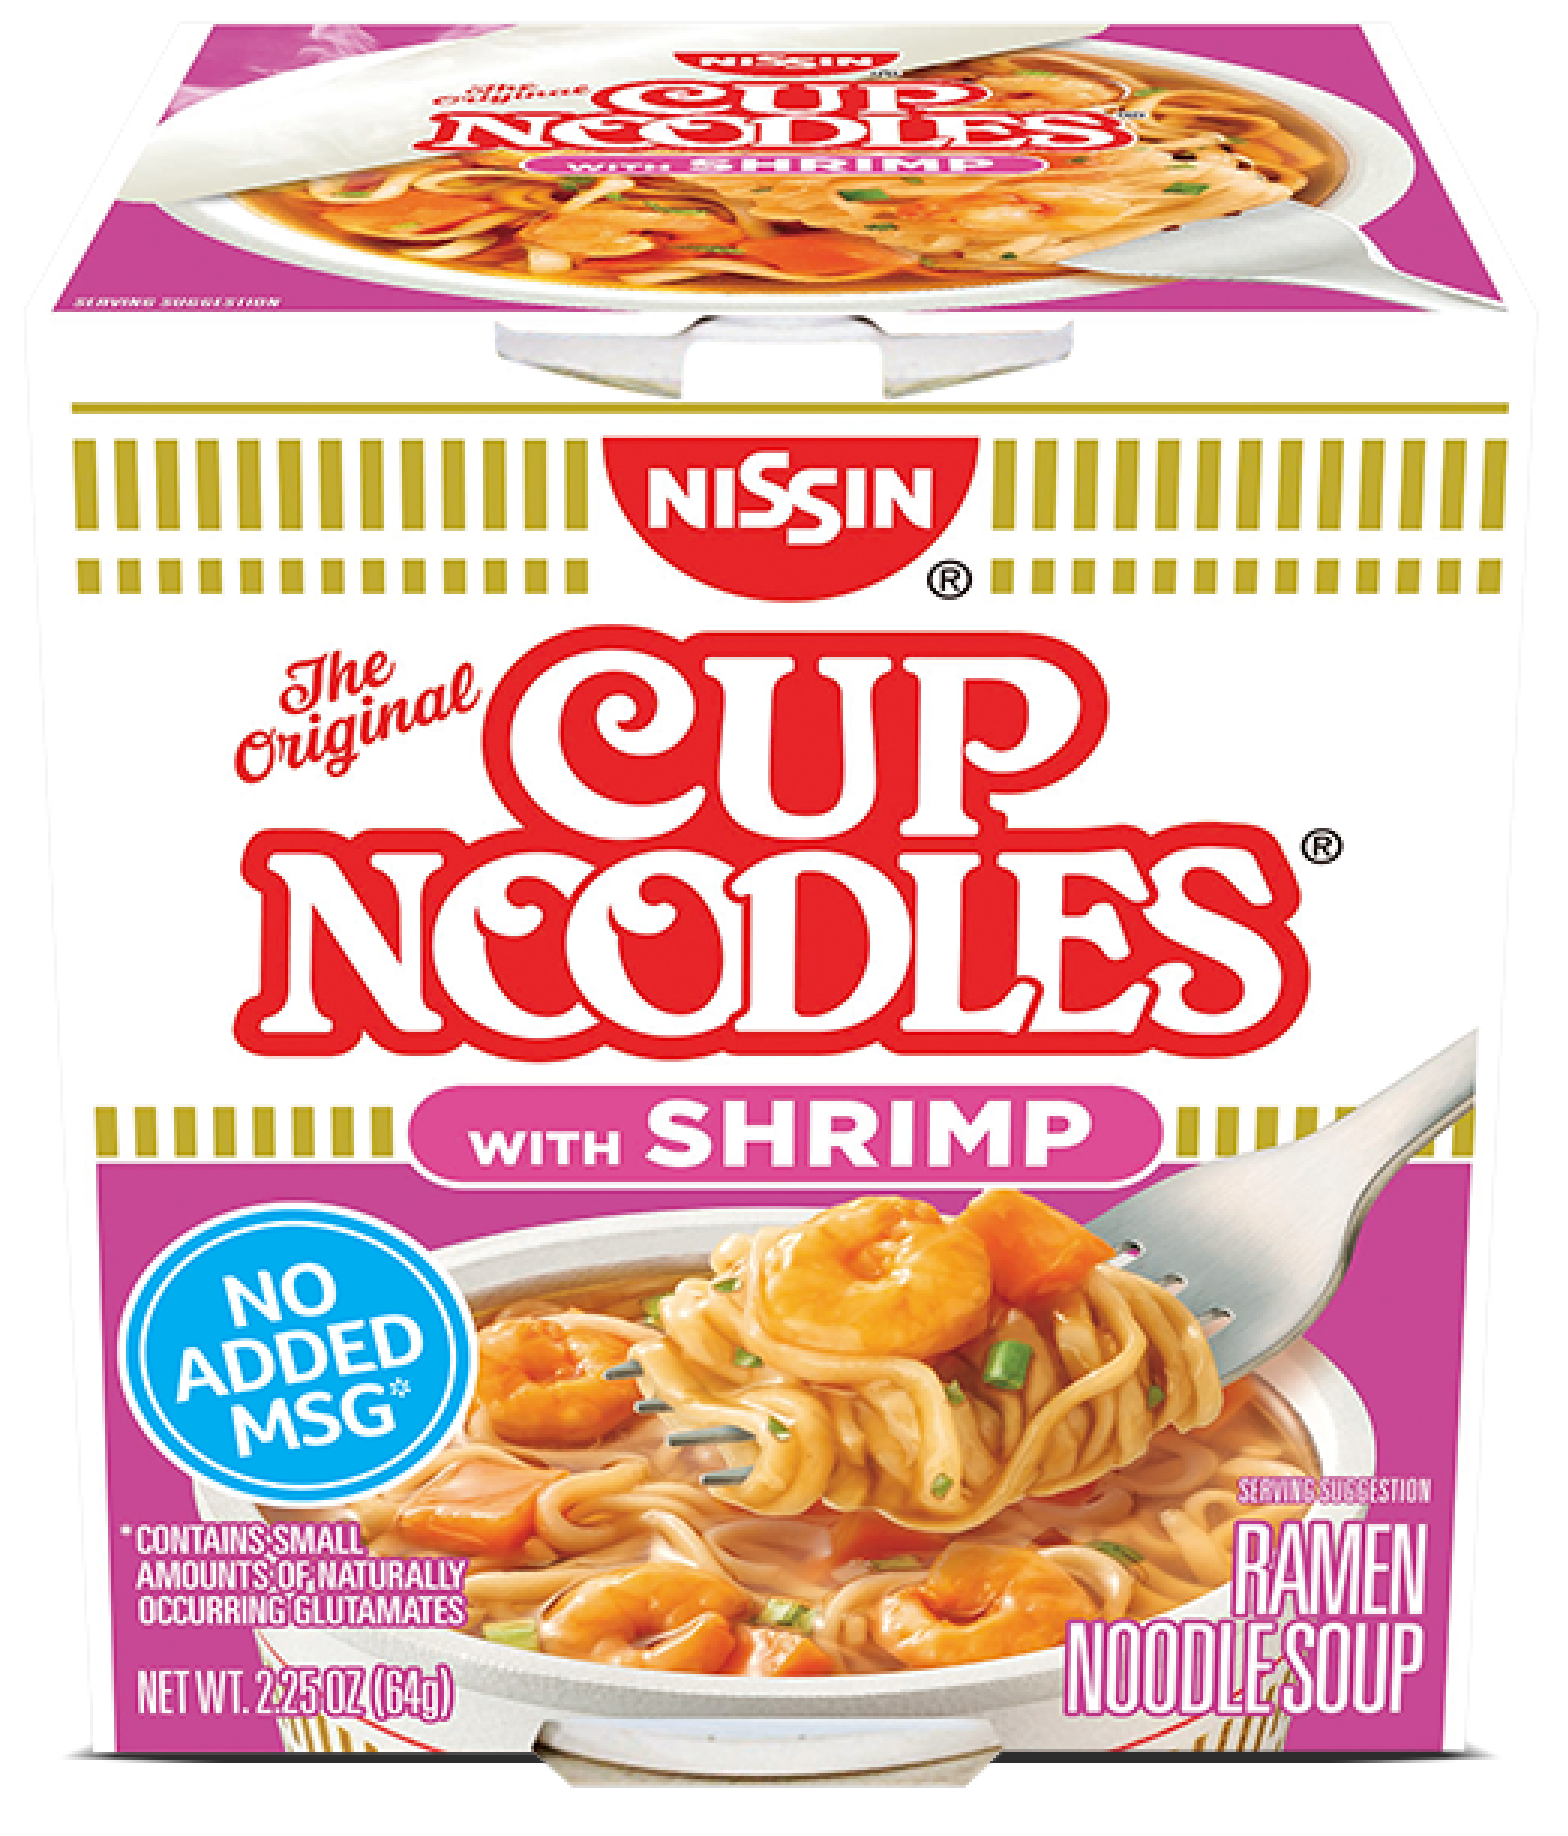 CUP NOODLES® ANNOUNCES NEW PAPER CUP PACKAGING FOR ITS ICONIC RAMEN NOODLES